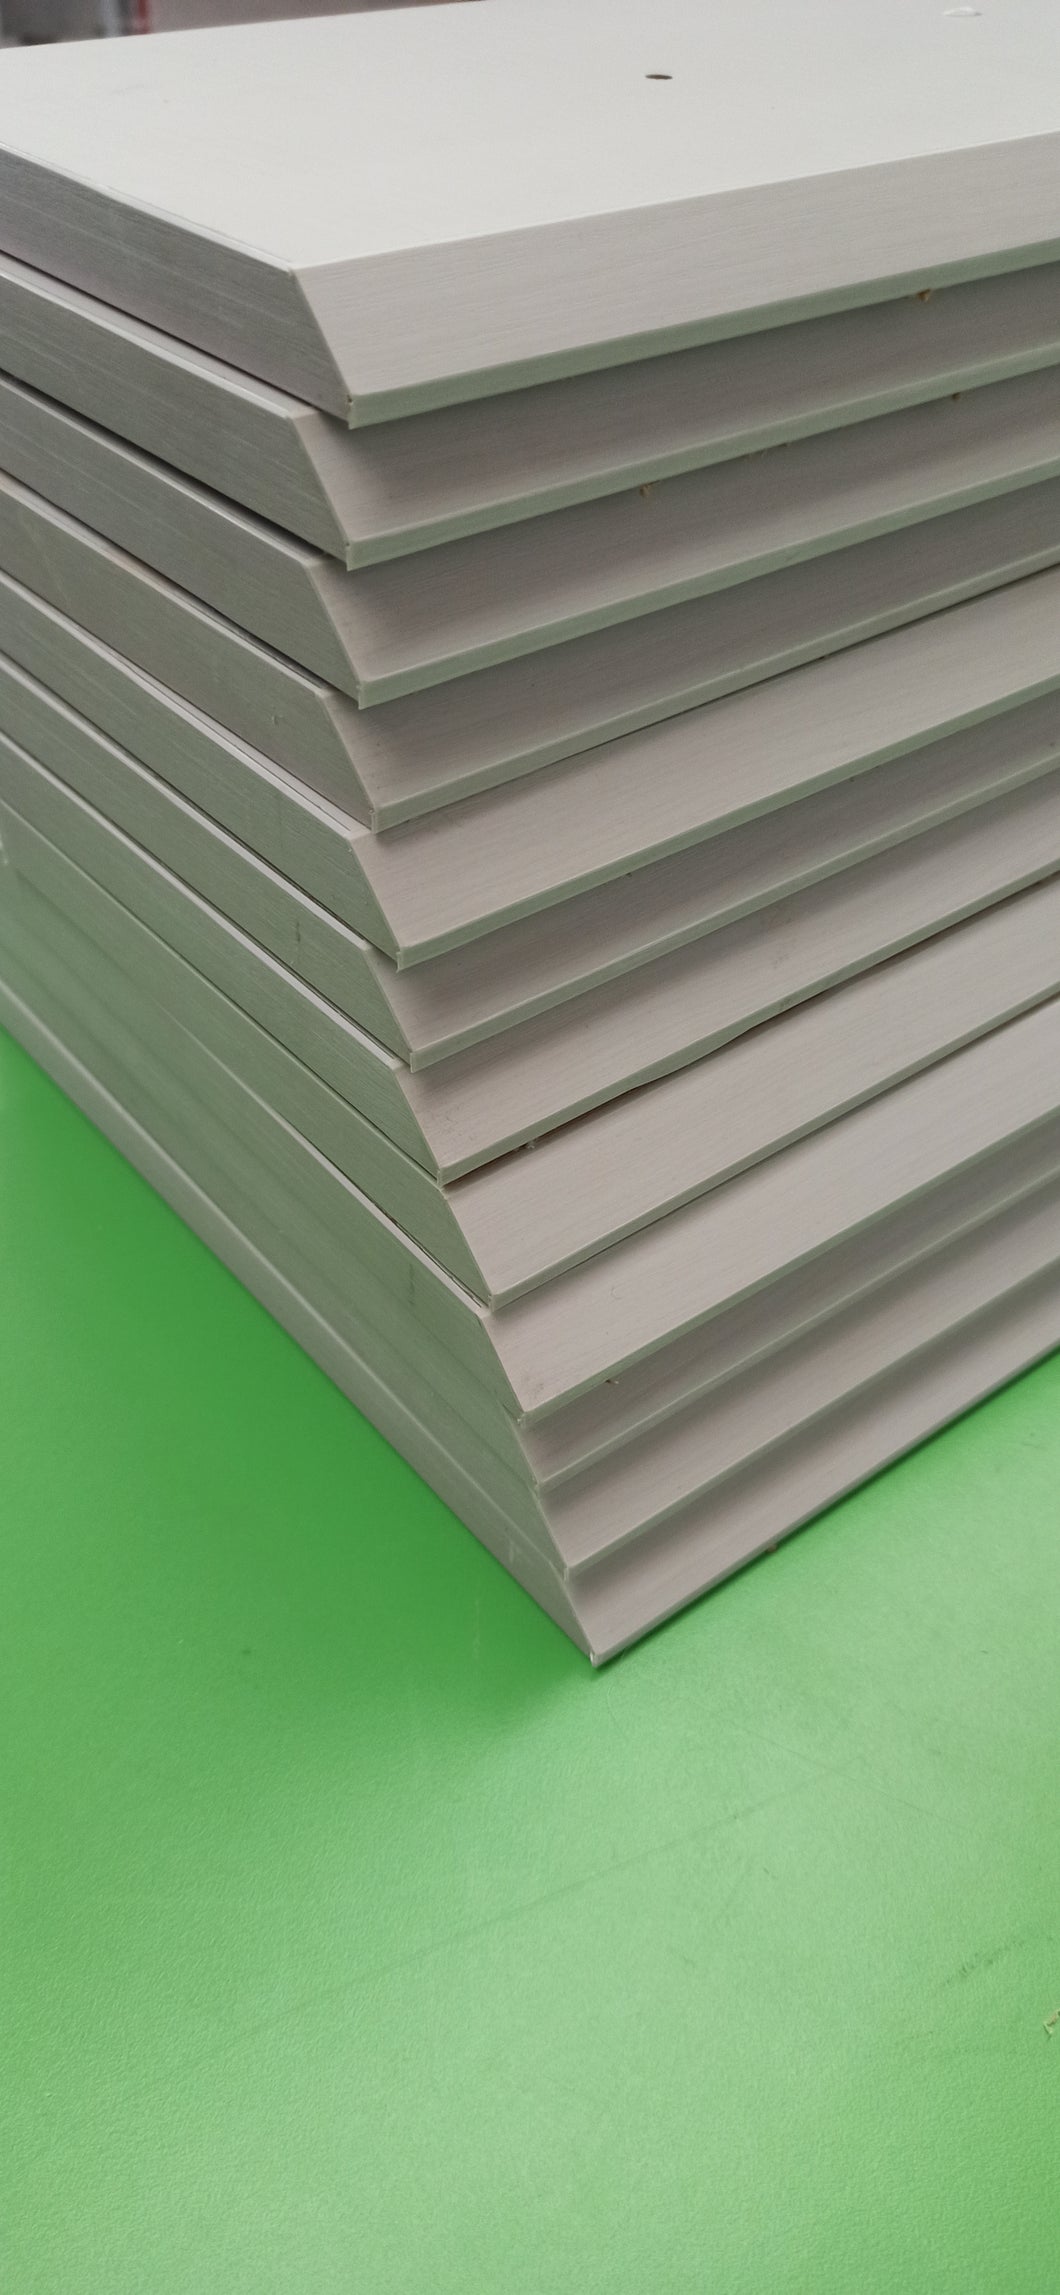 We are open for edging your melamine board !! 45Degree Bevelled Edge